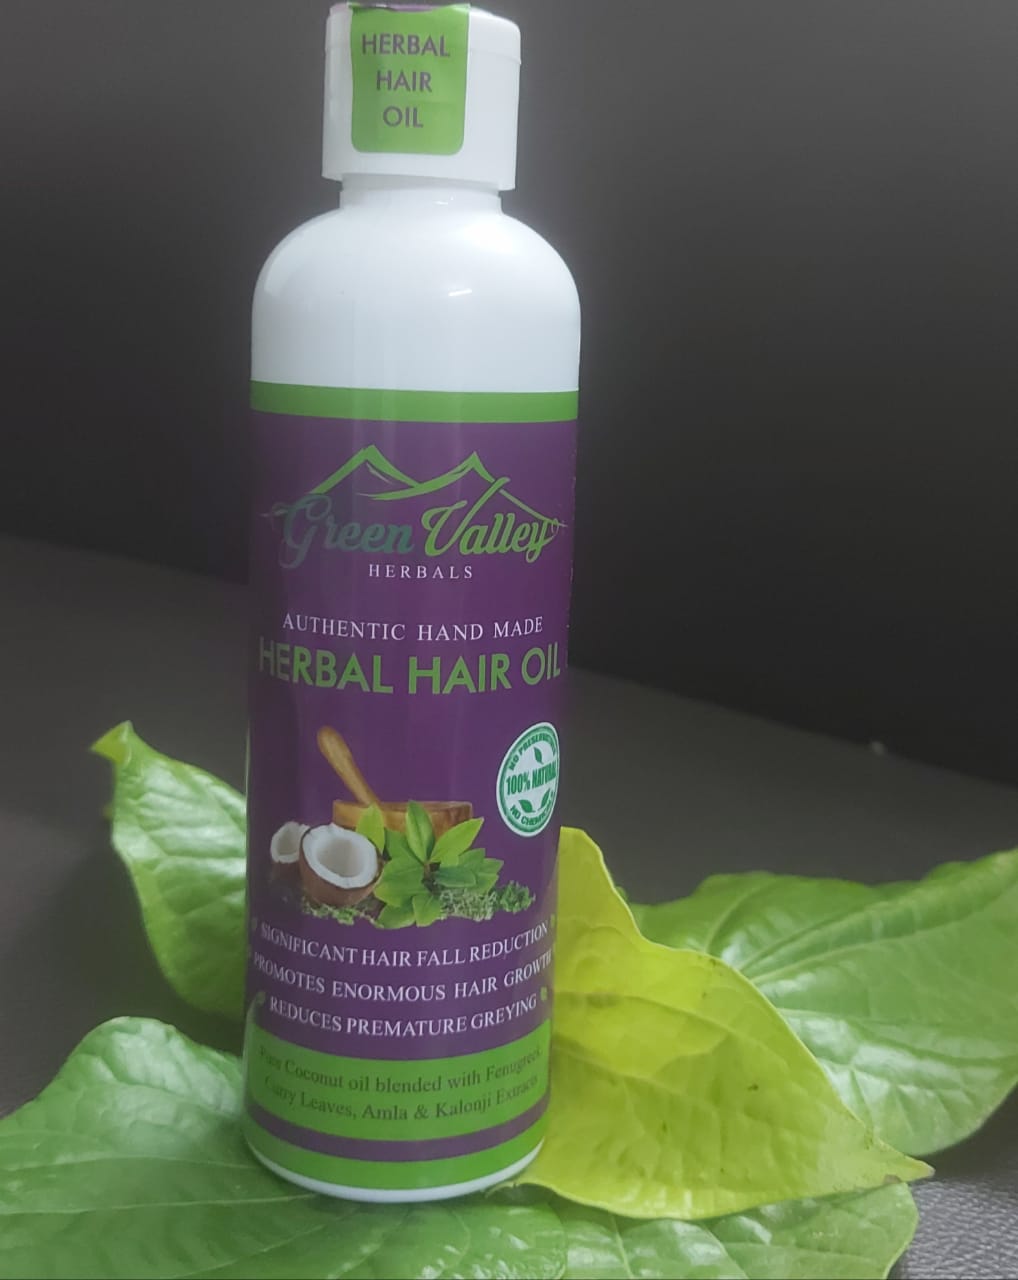 Authentic Hand Made Herbal Hair Oil  from Green Valley Herbal